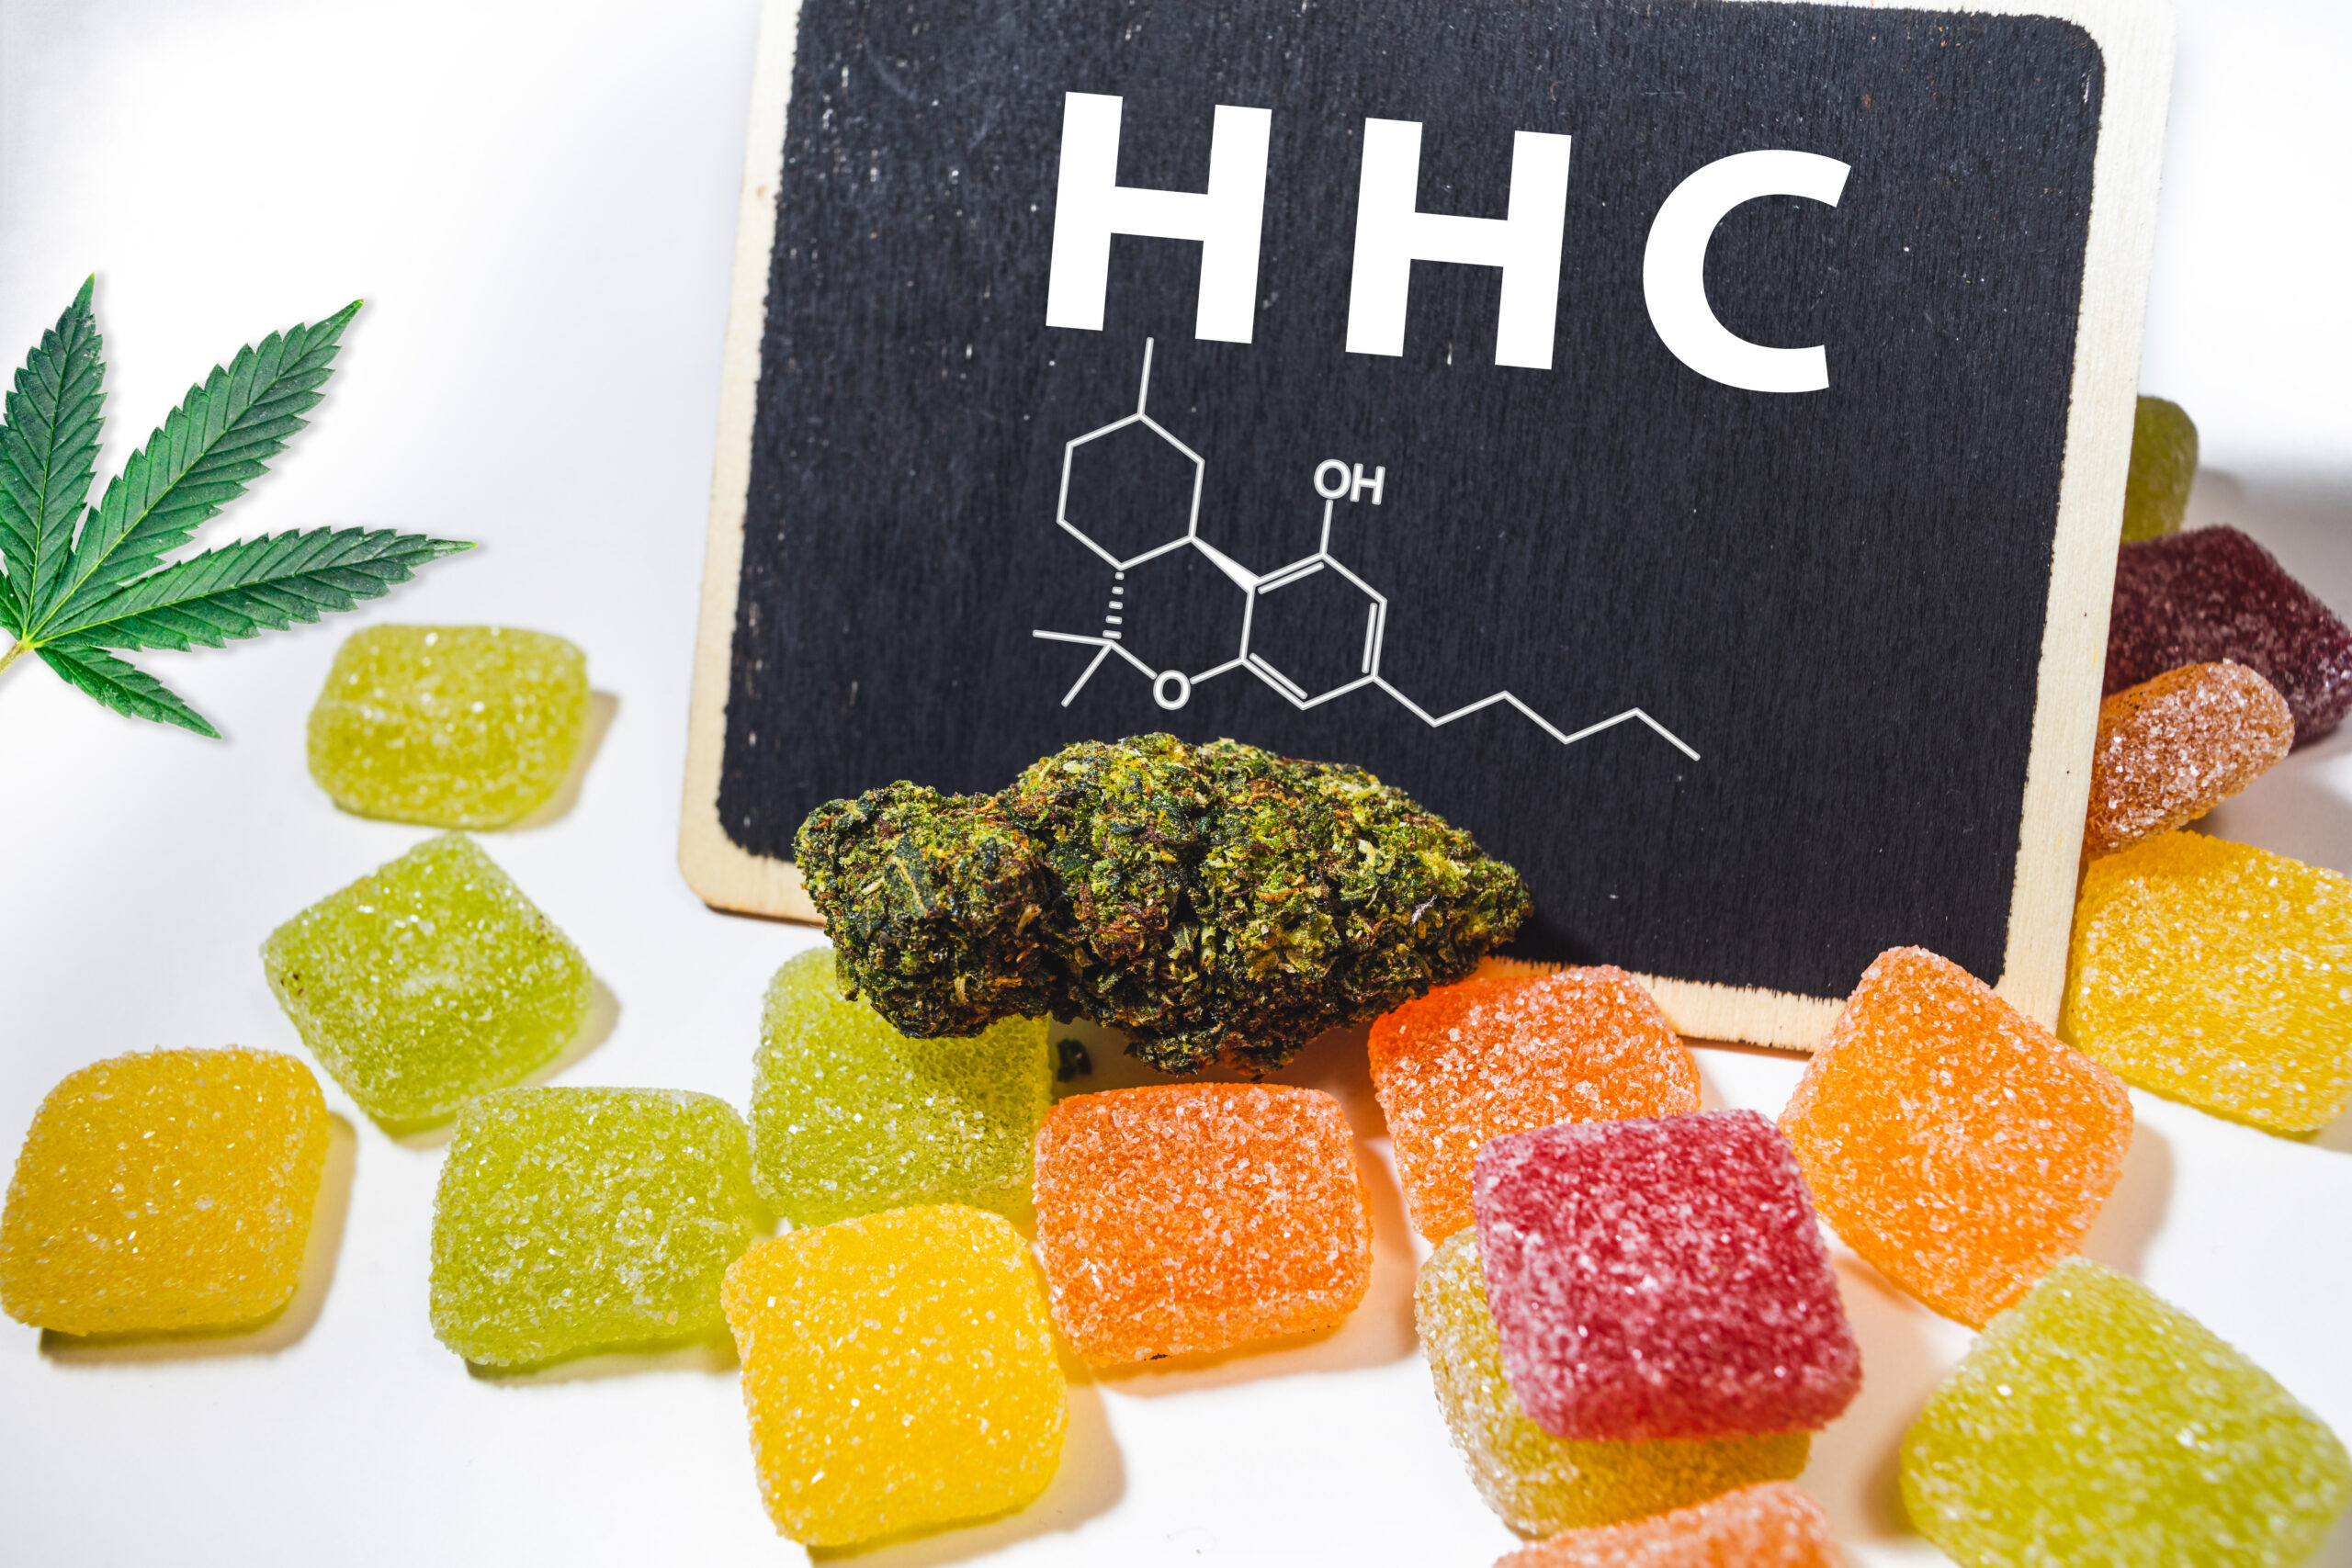 Is it Safe to Consume Cannabis Edibles?